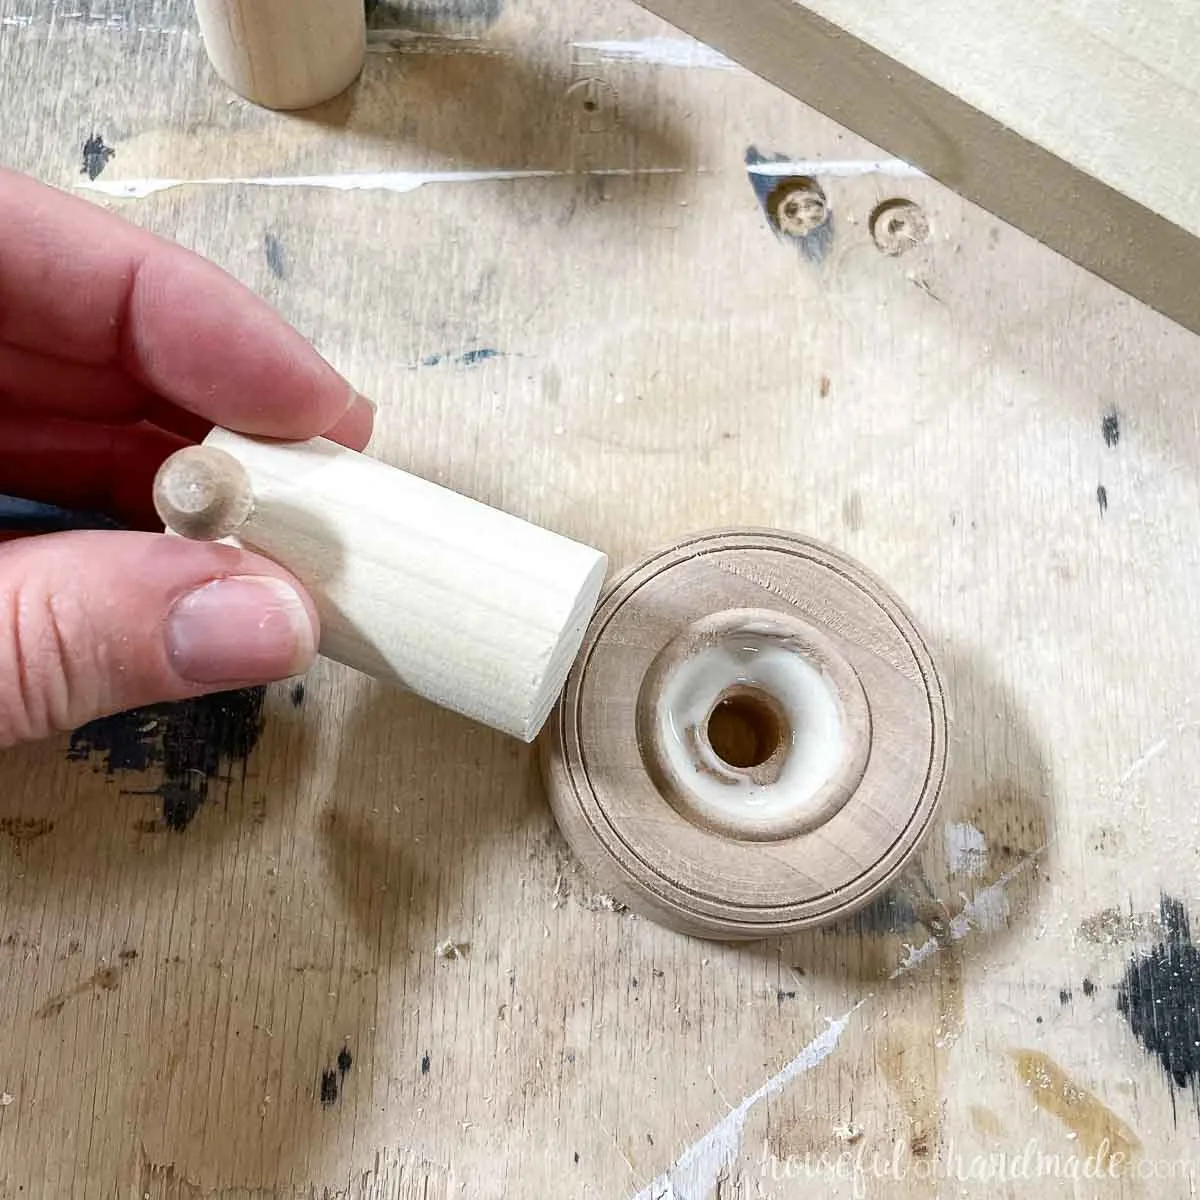 Glue in the center of the wood wheel before pressing the dowel into it. 